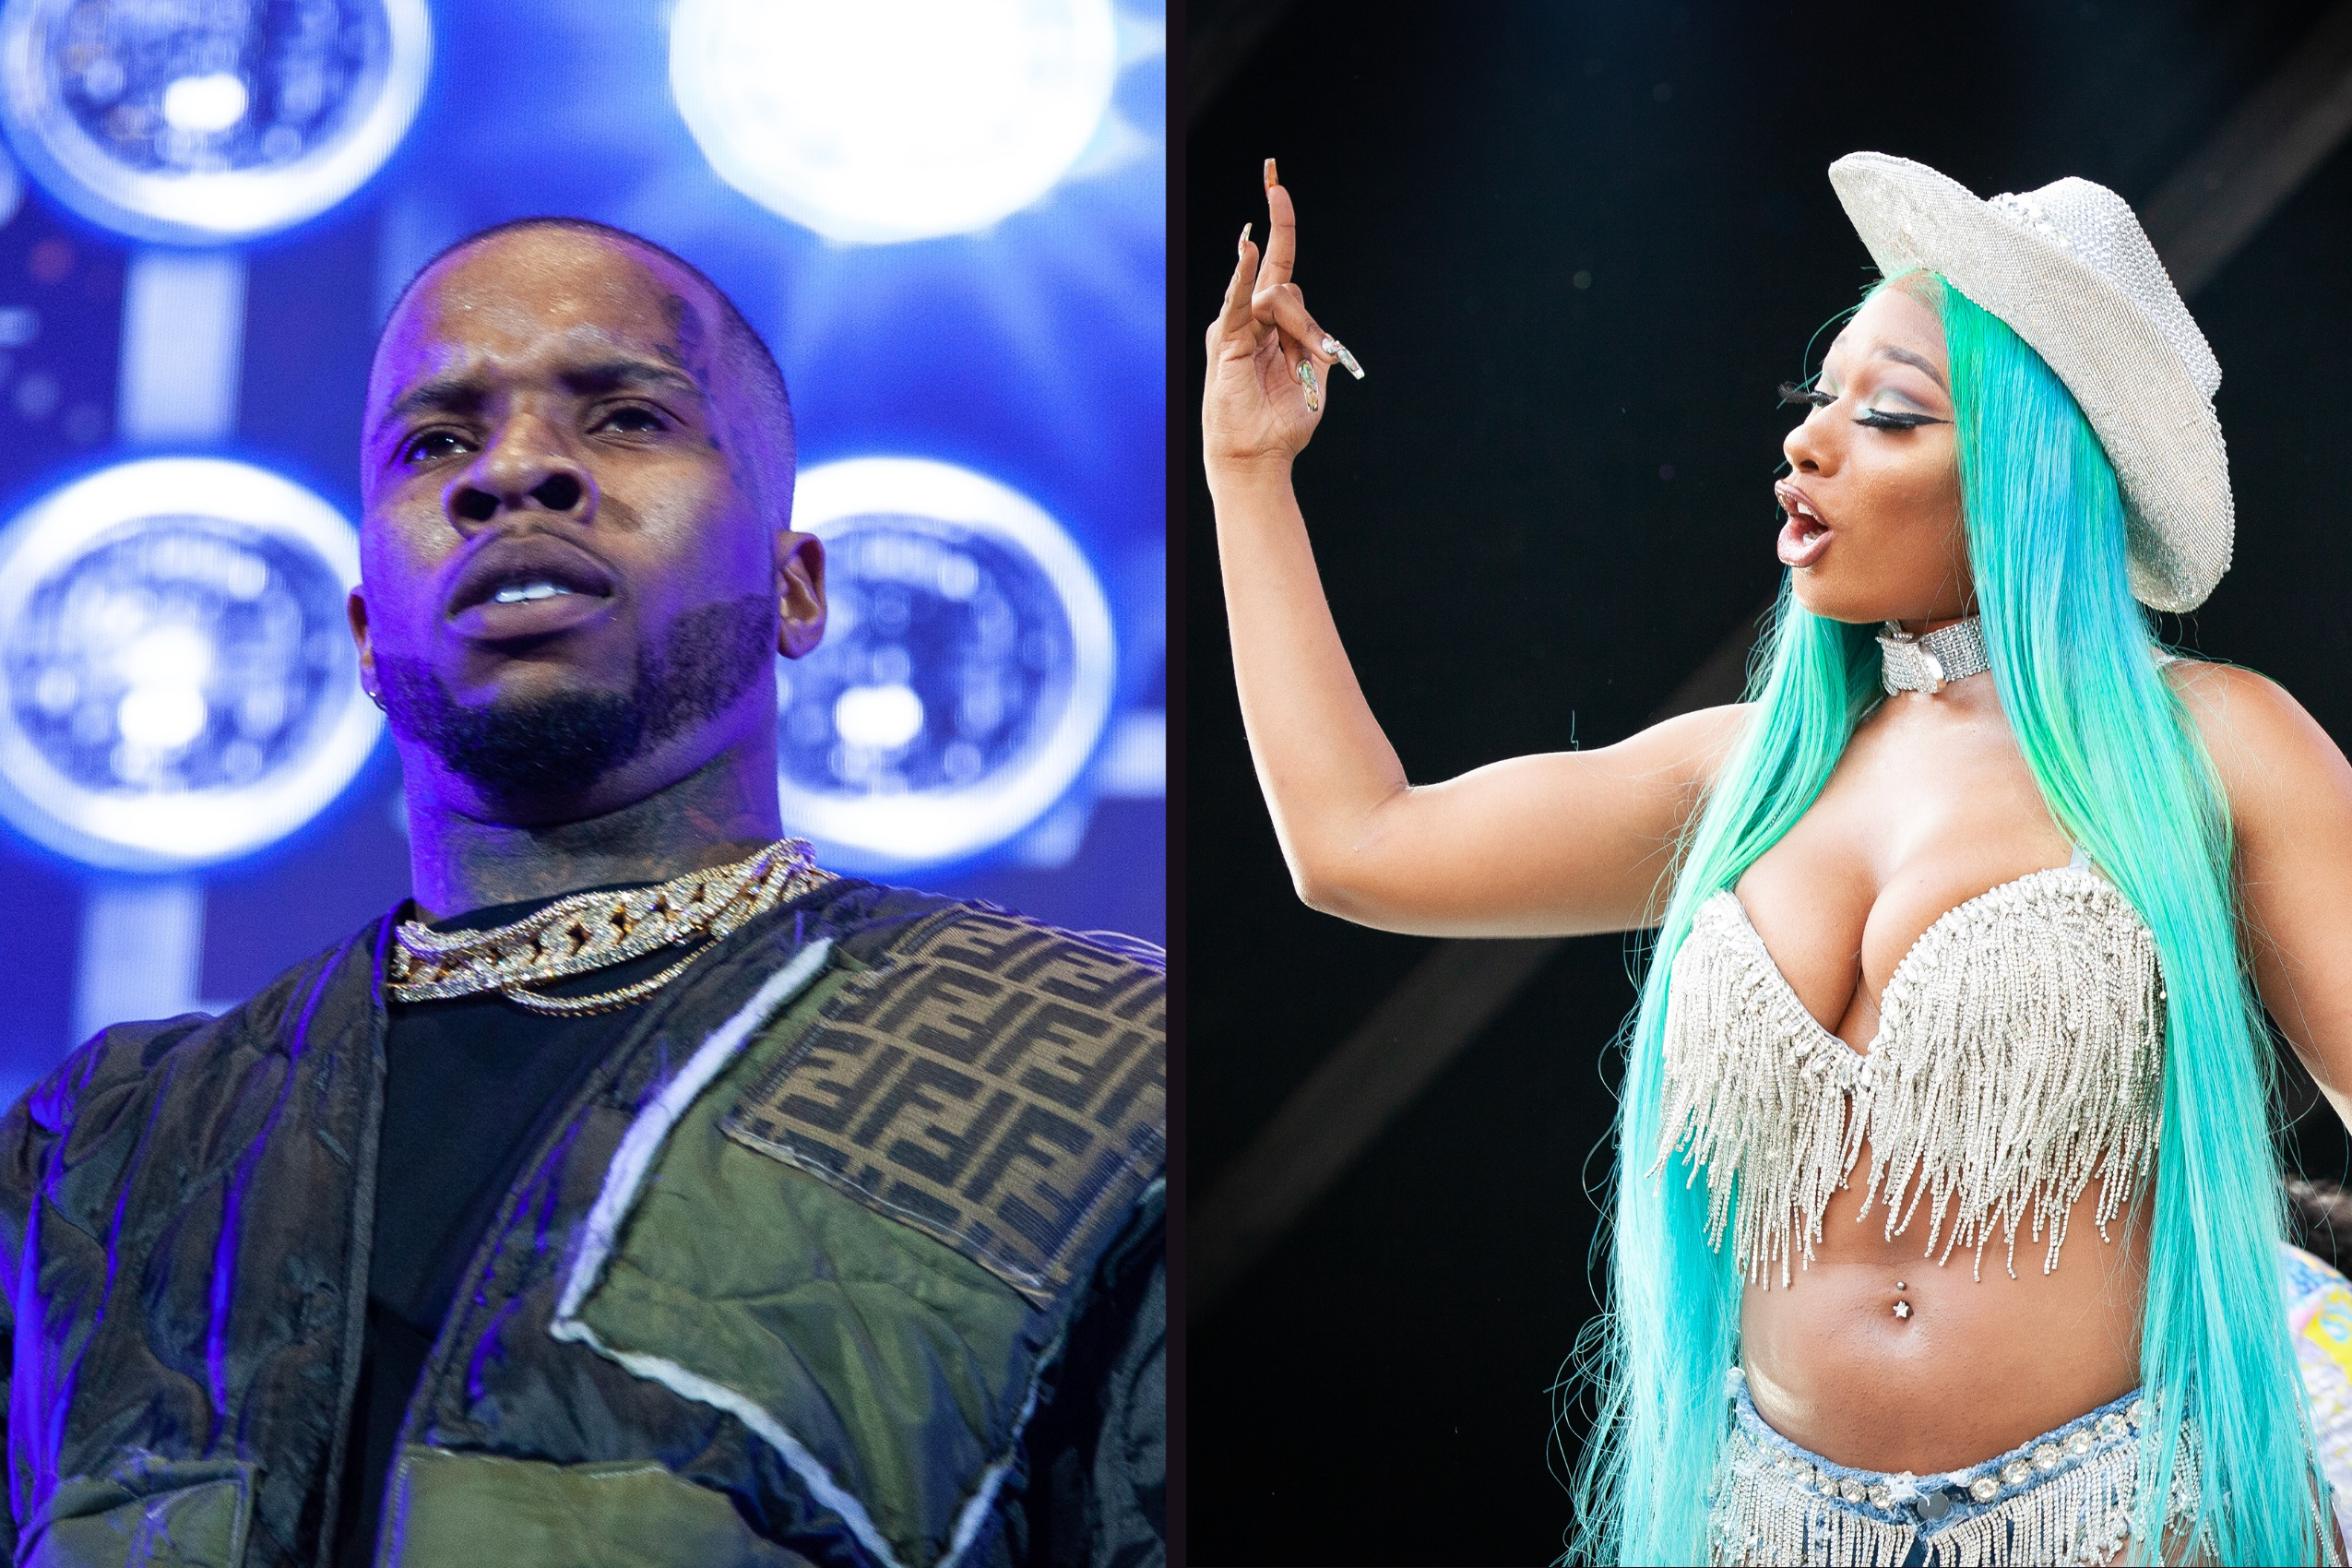 Megan Thee Stallion Says Tory Lanez Tried To Pay For Her Silence